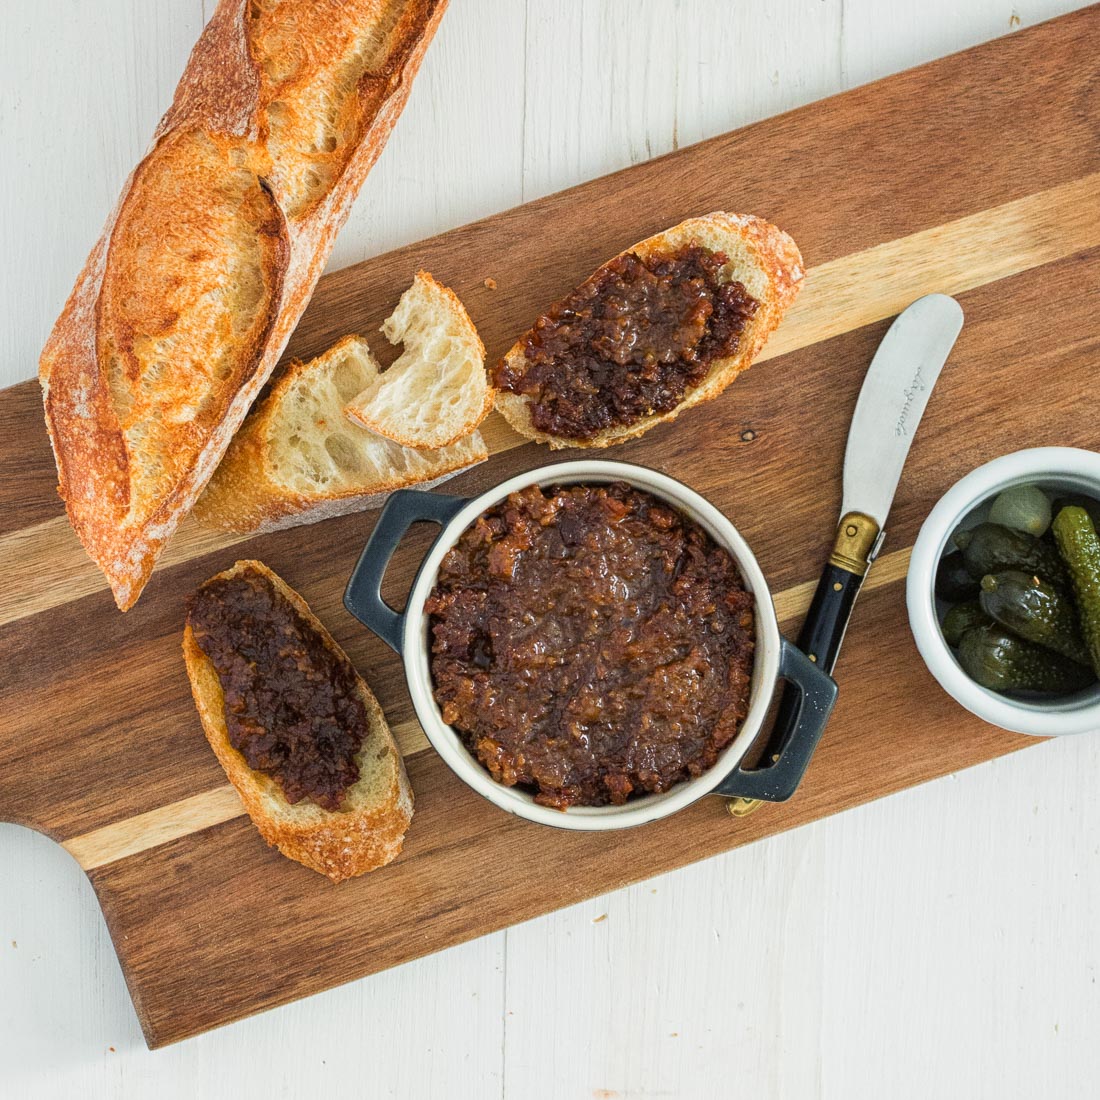 Bacon jam is a salty, sweet, savoury bacon flavour bomb. Serve it along with baguette or use it in the ultimate bacon, lettuce and tomato sandwich.